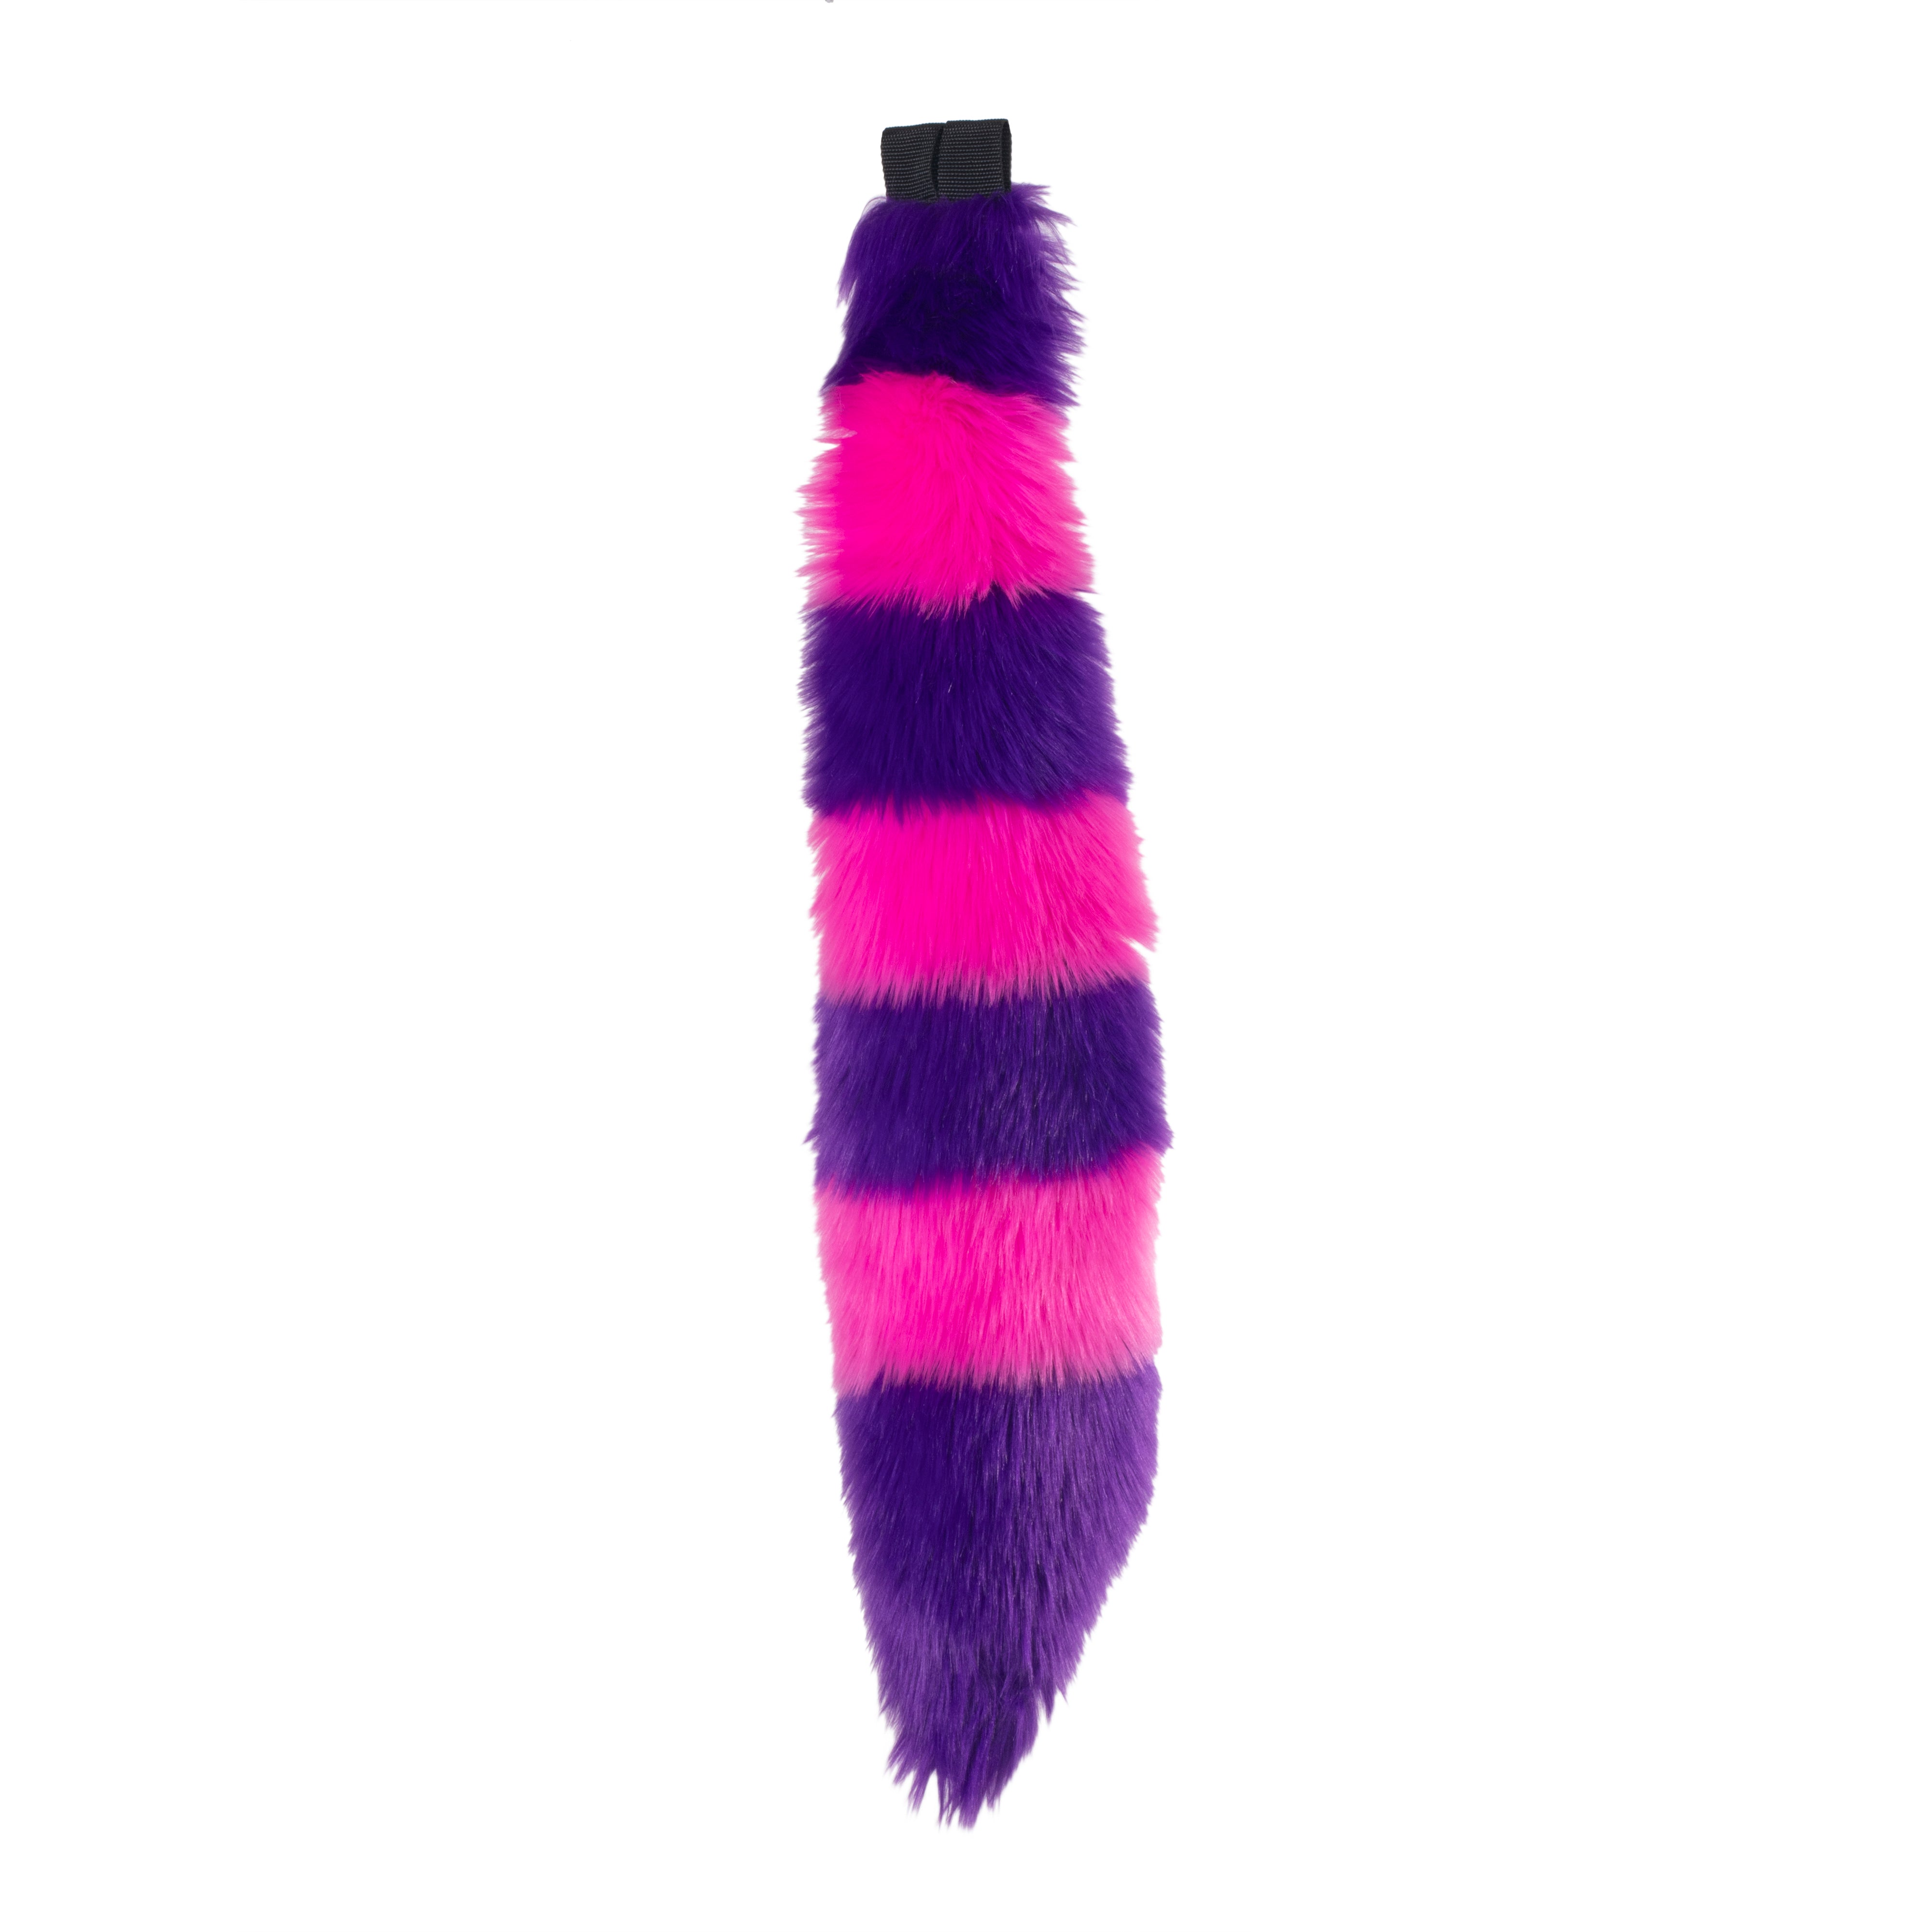 Pawstar Cheshire Full Fox Tail cat kitty alice in wonderland  furry fluffy partial fursuit halloween costume or cosplay accessory